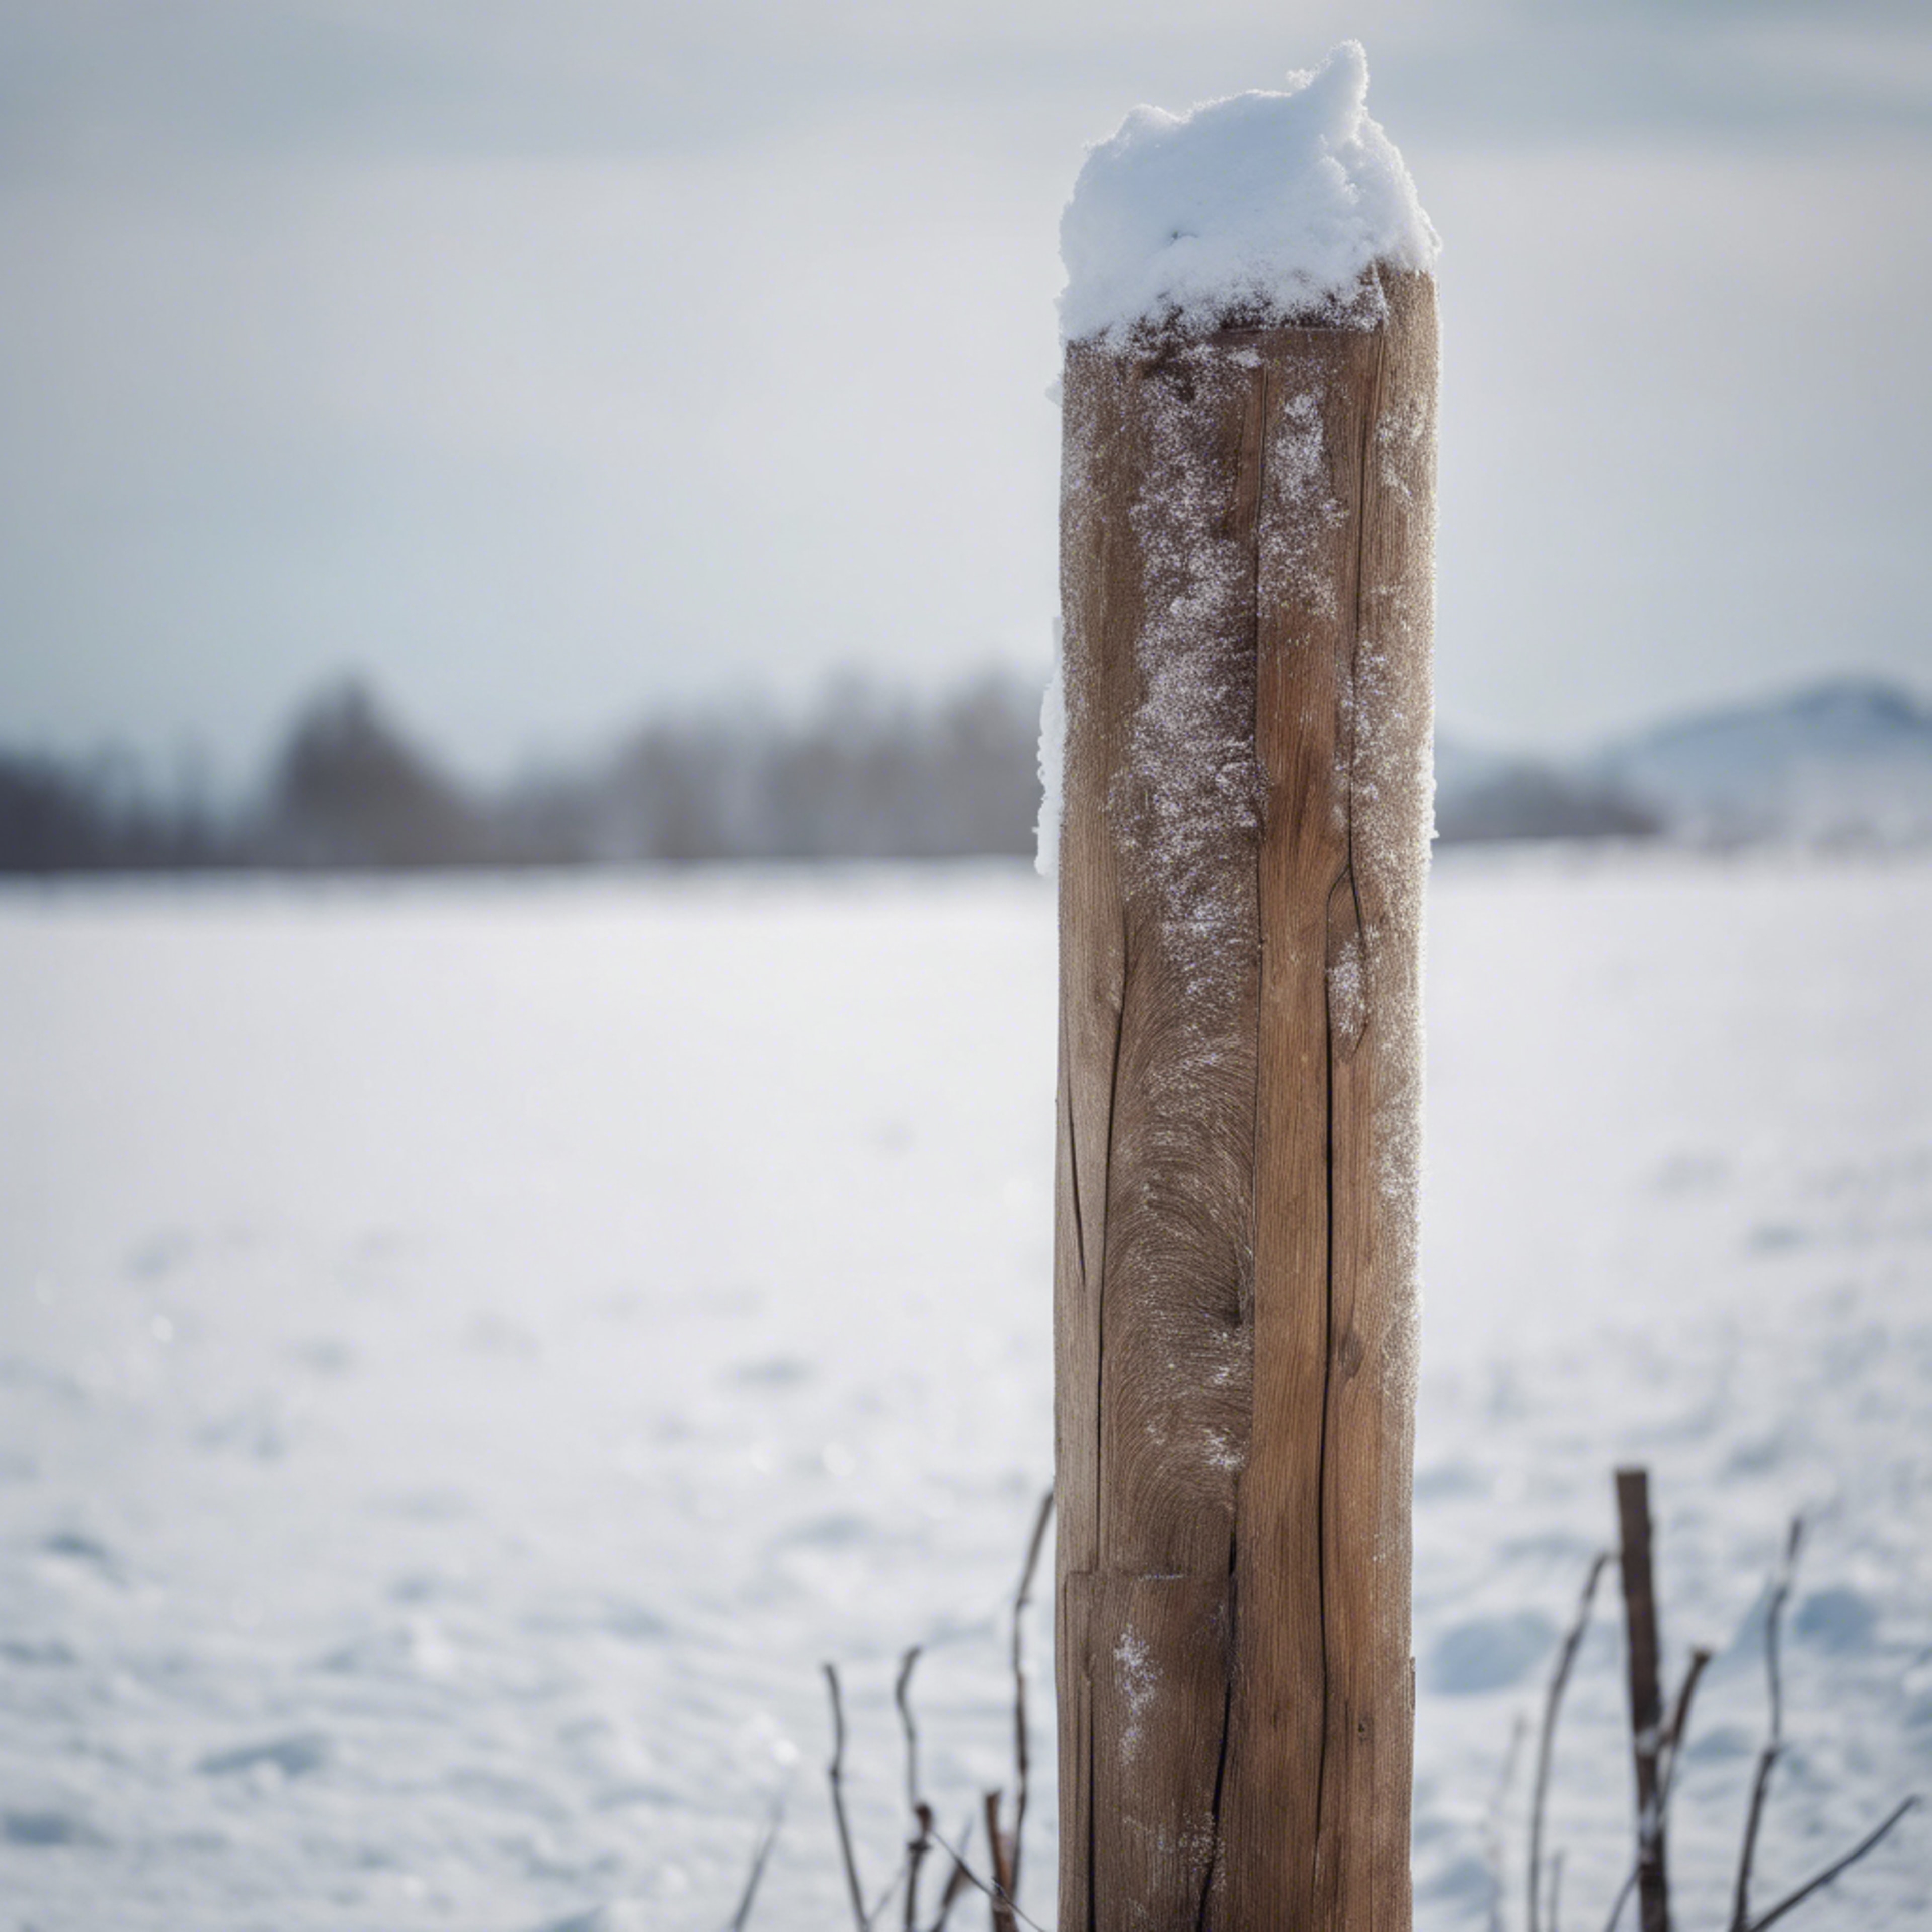 A fur-capped wooden post, standing stoutly against the winter winds in the snow-covered plains. Wallpaper[2bd820722d59404bb802]